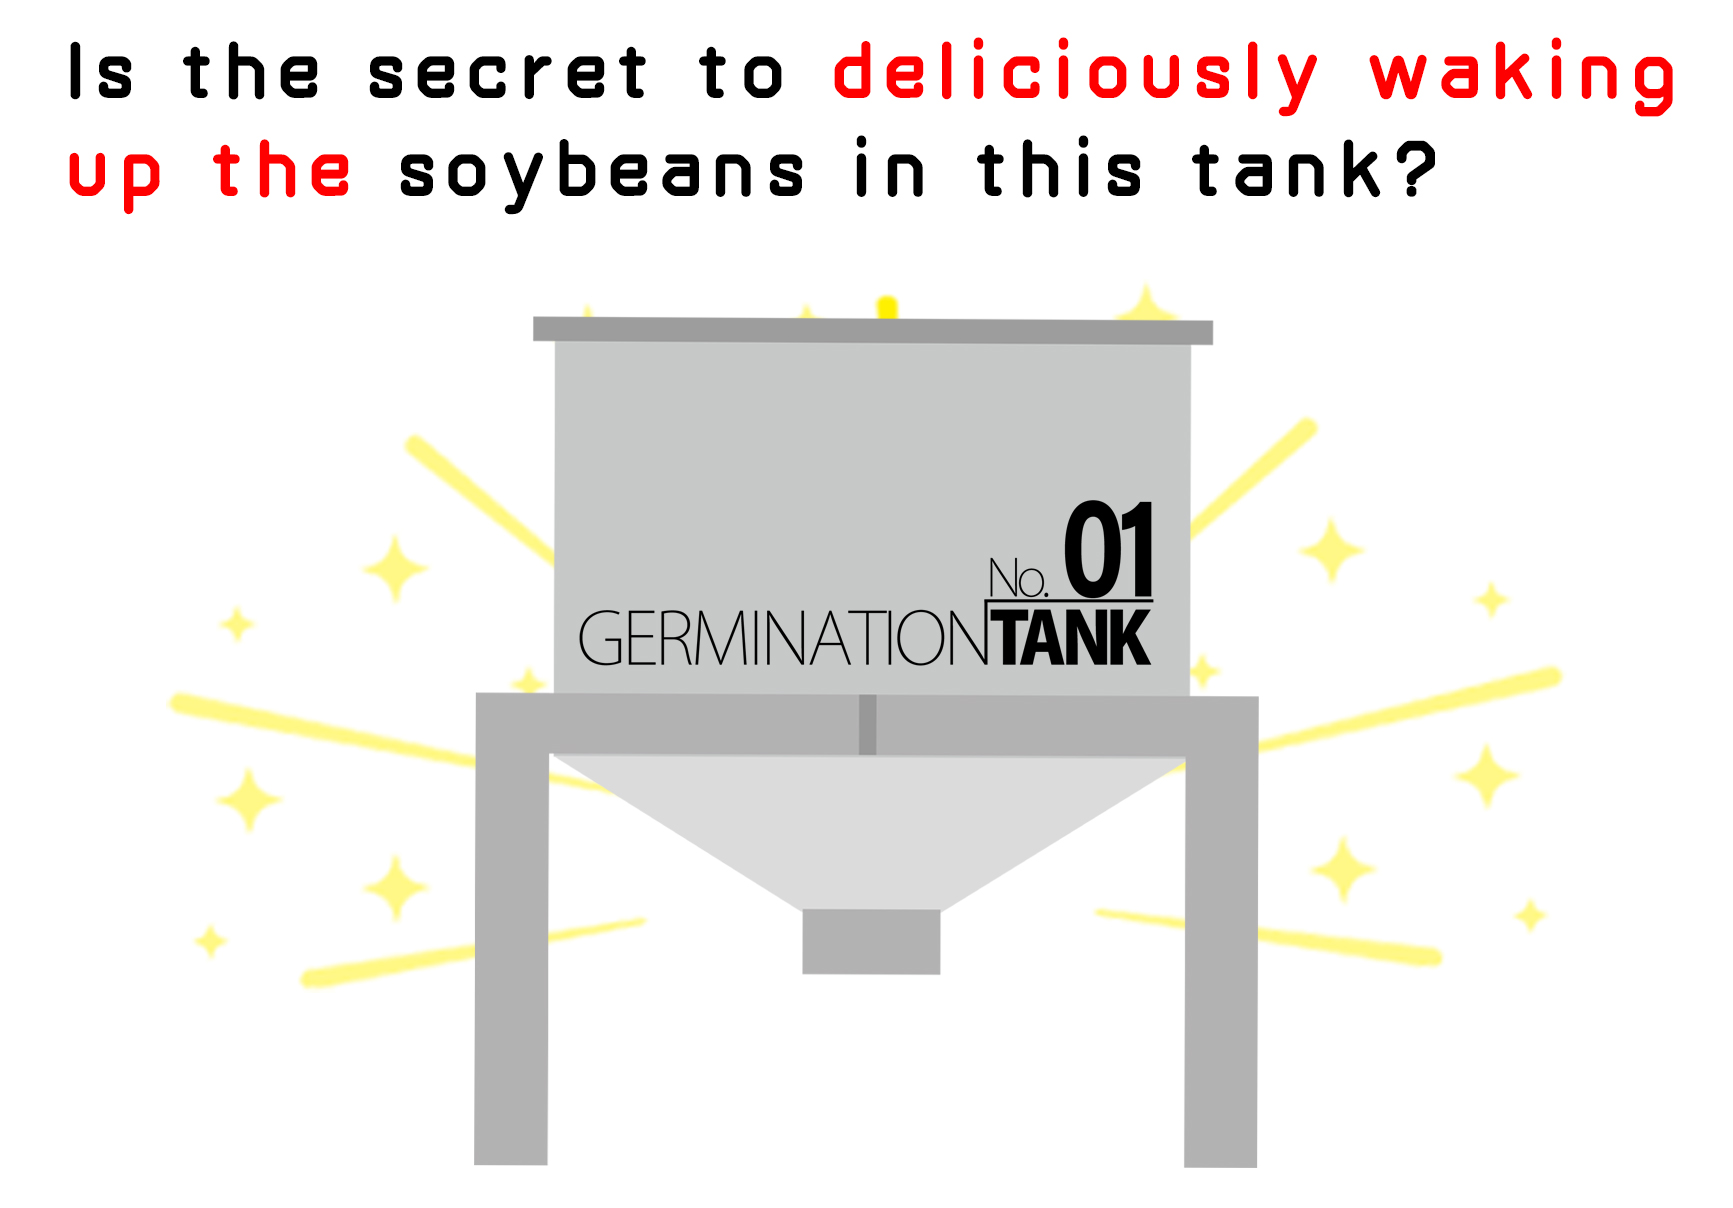 Is the secret to deliciously waking up the soybeans in this tank?